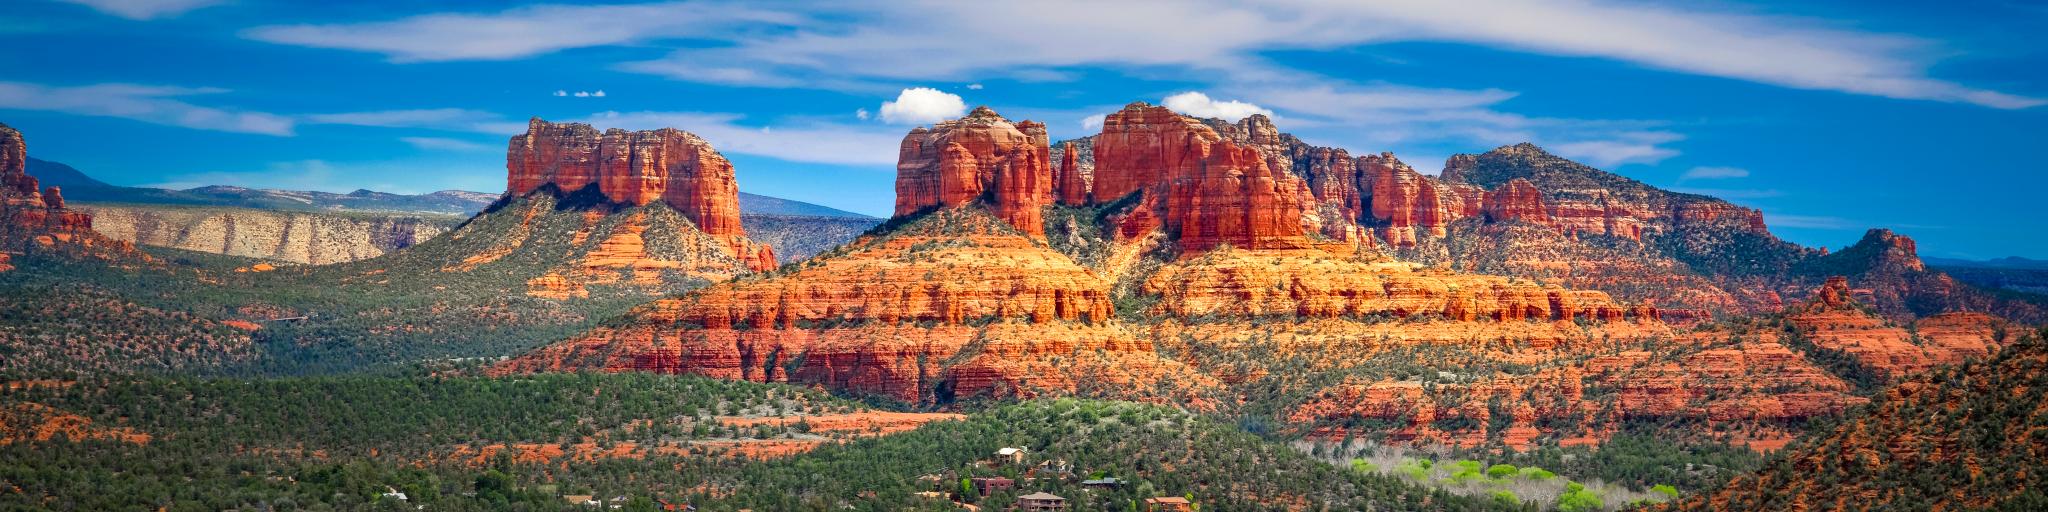 A Panoramic View of Red Rock Mountain with a beautiful sight of green trees' and a cloudy blue sky in Sedona, Arizona.